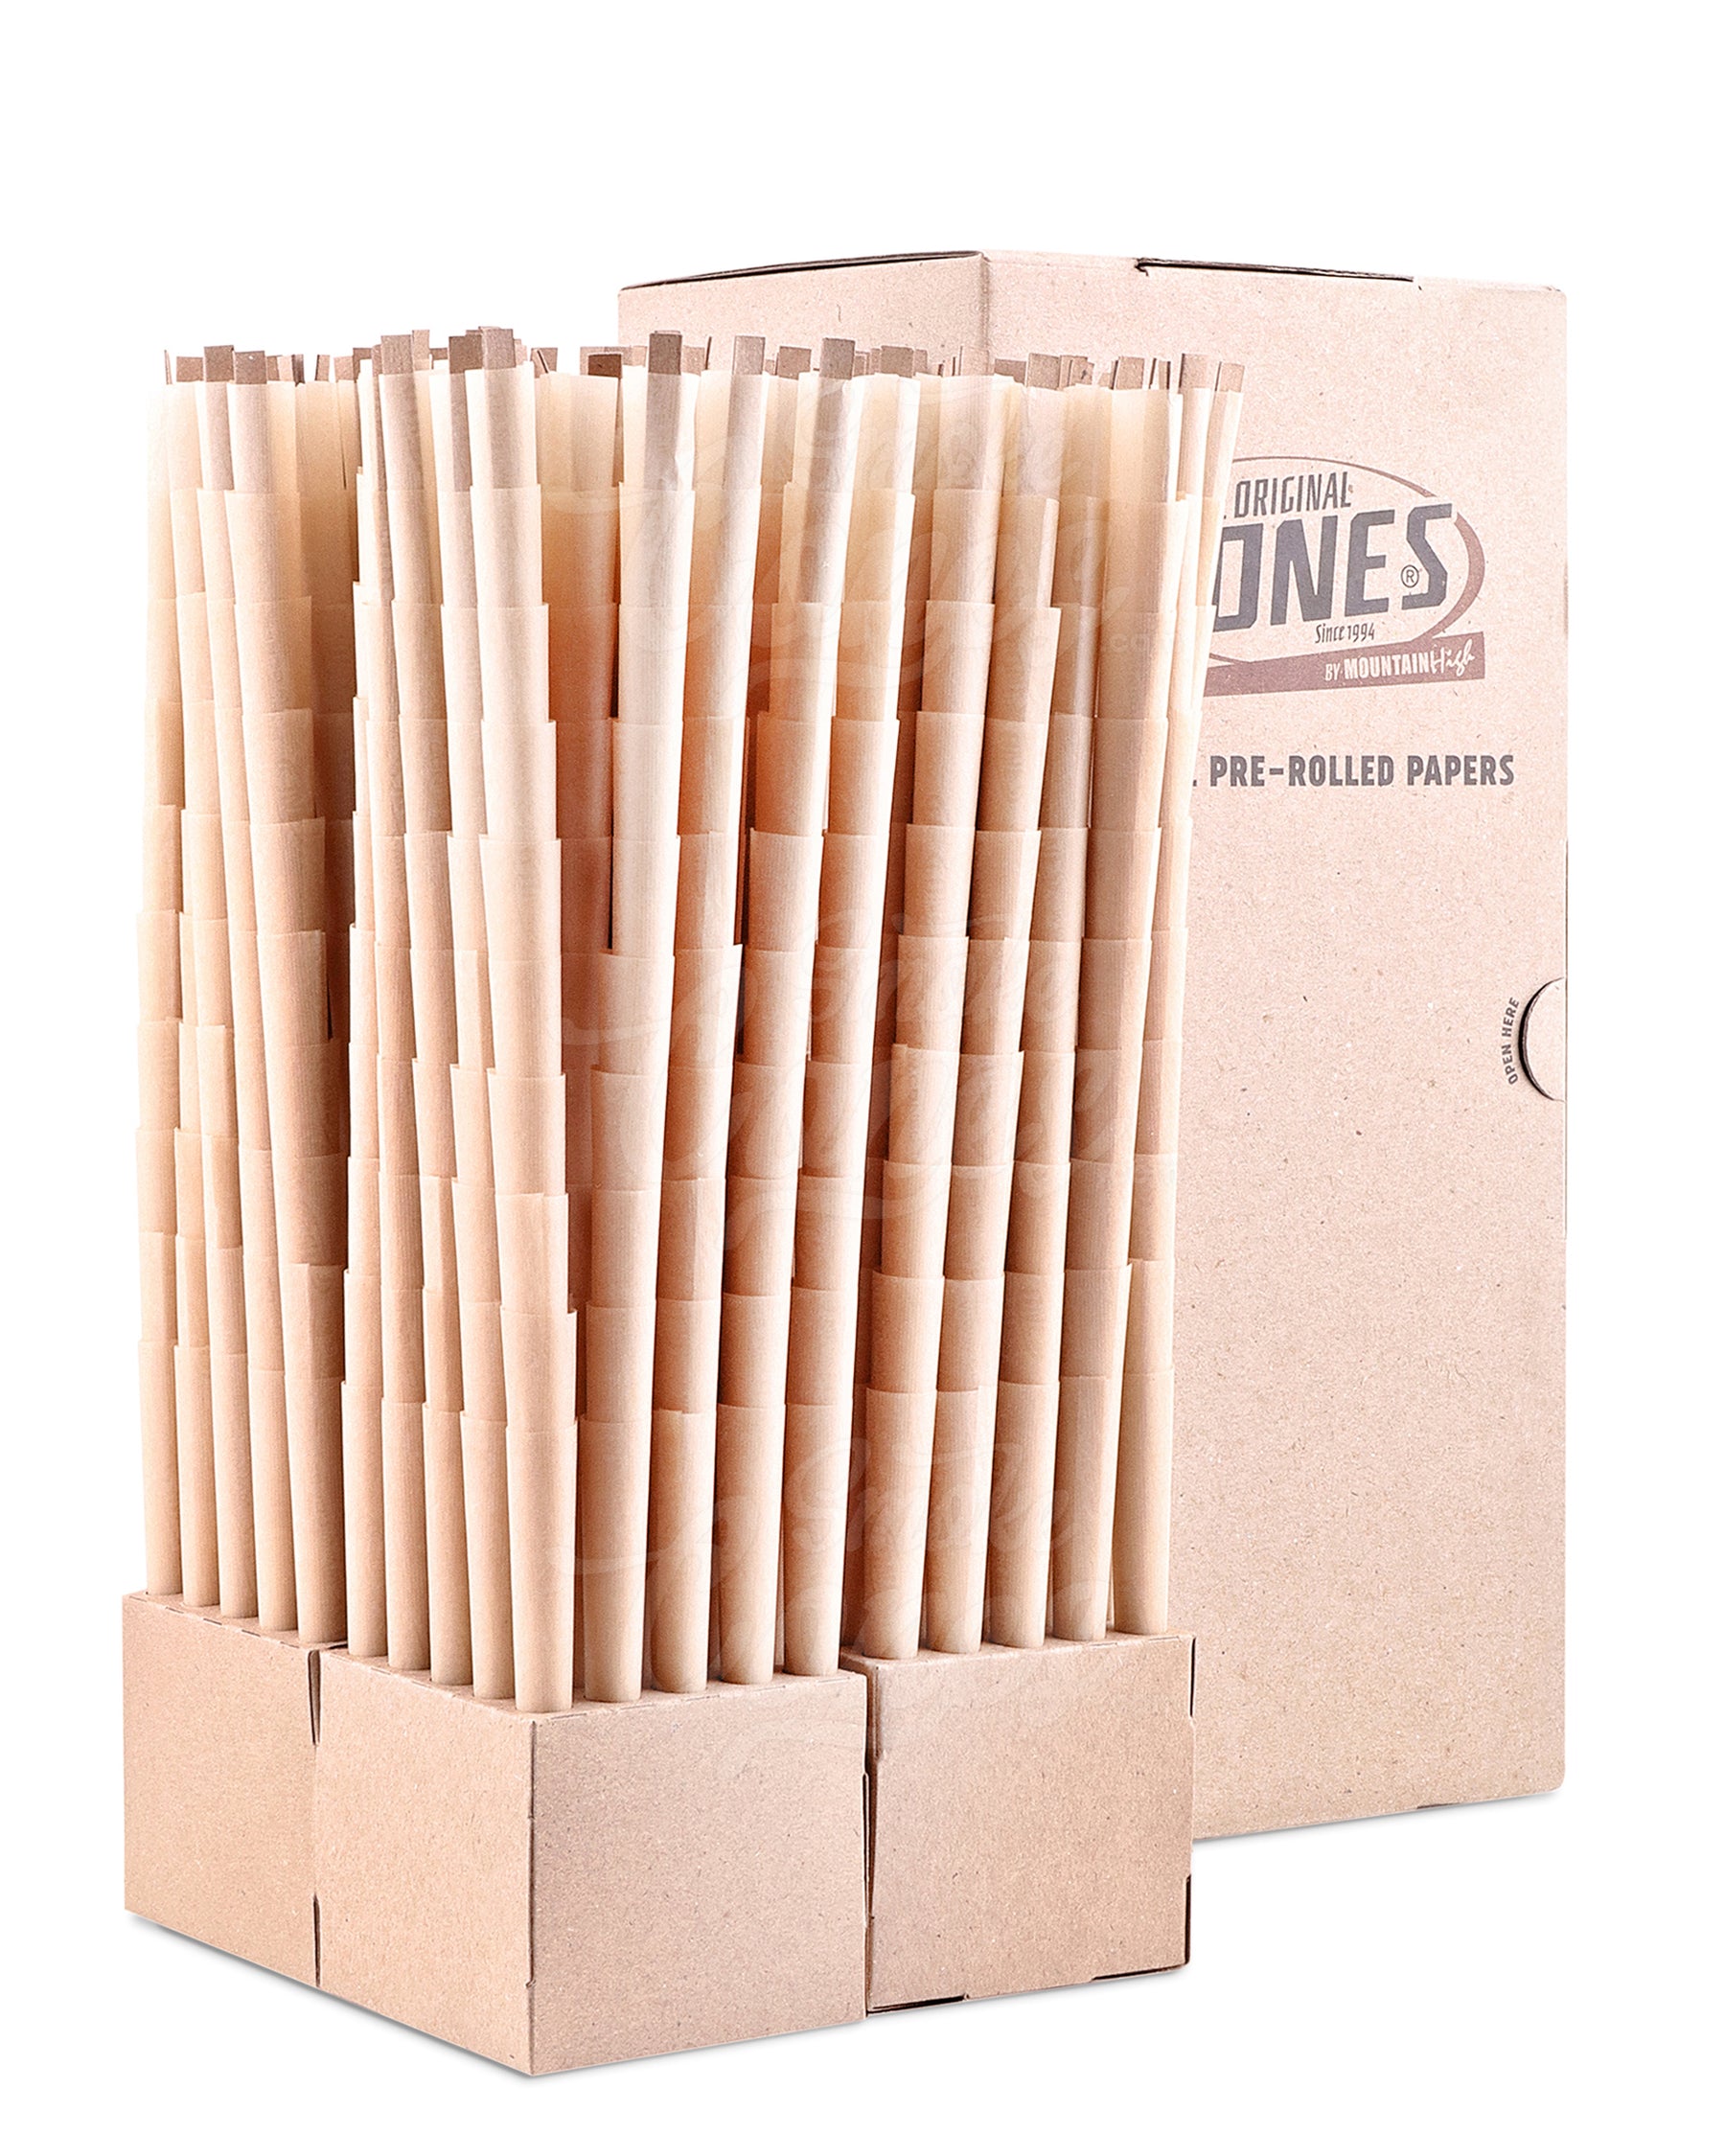 The Original Cones 109mm King Slim Size Unbleached Brown Paper Pre Rolled Cones w/ Filter Tip 1000/Box